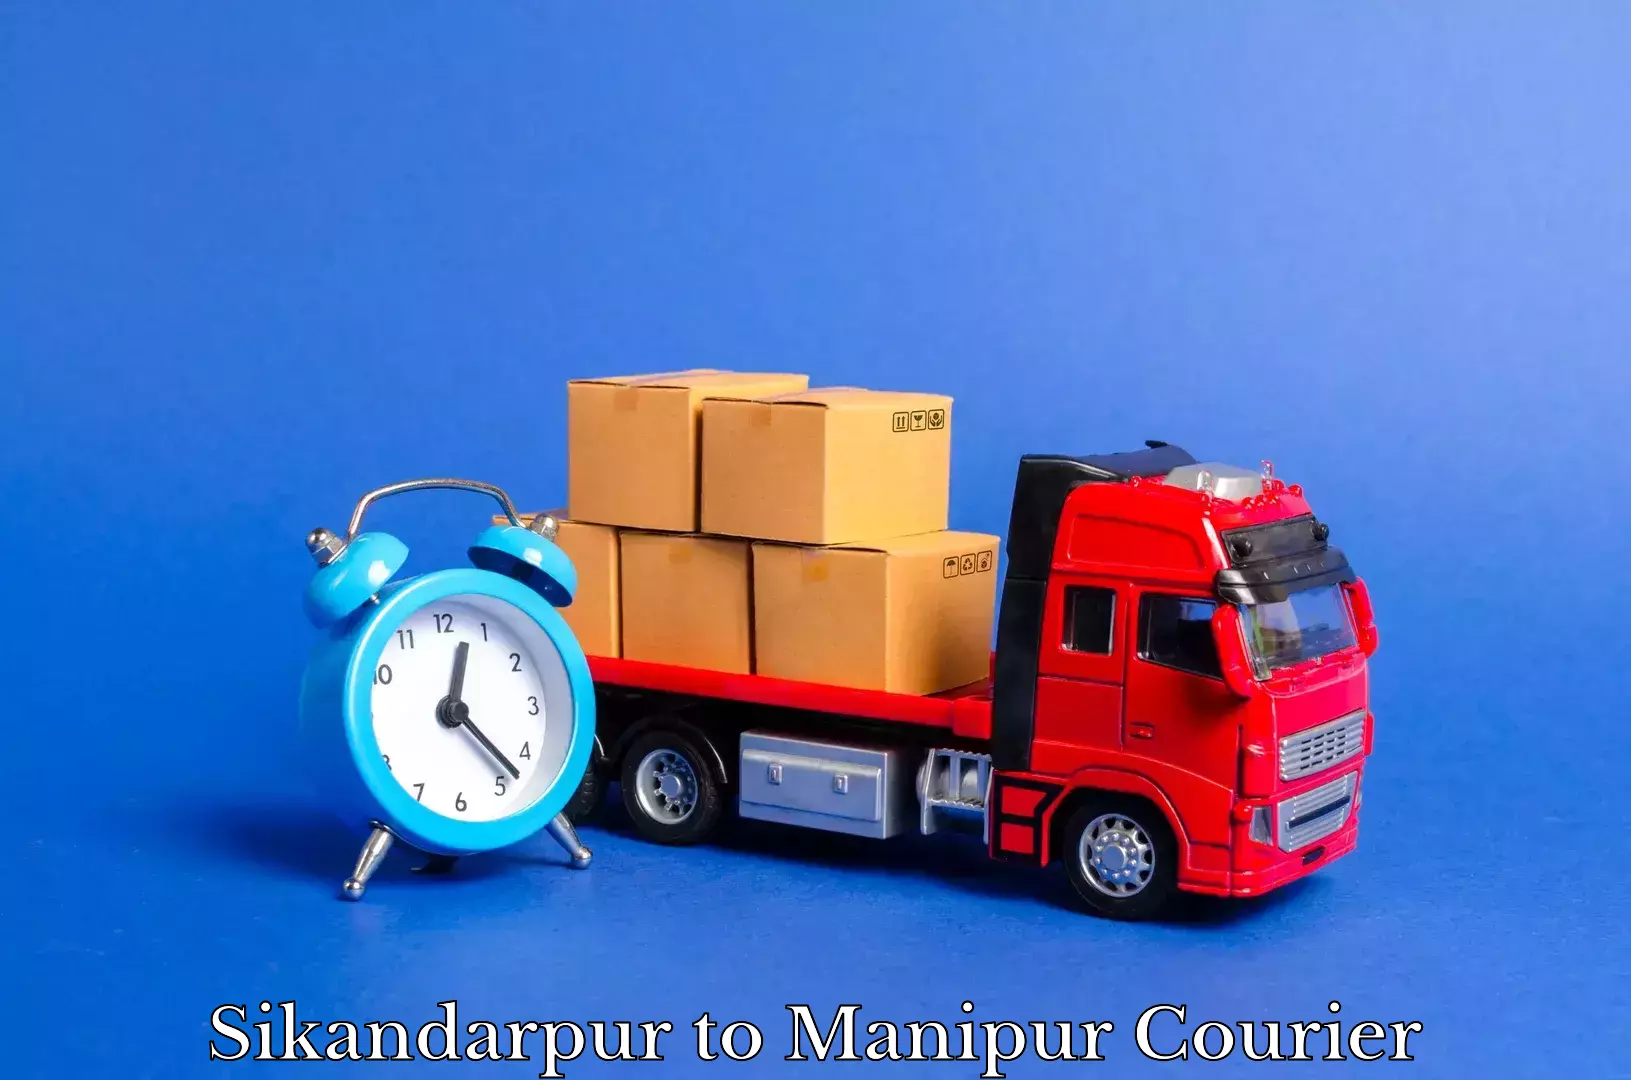 Furniture delivery service Sikandarpur to Thoubal